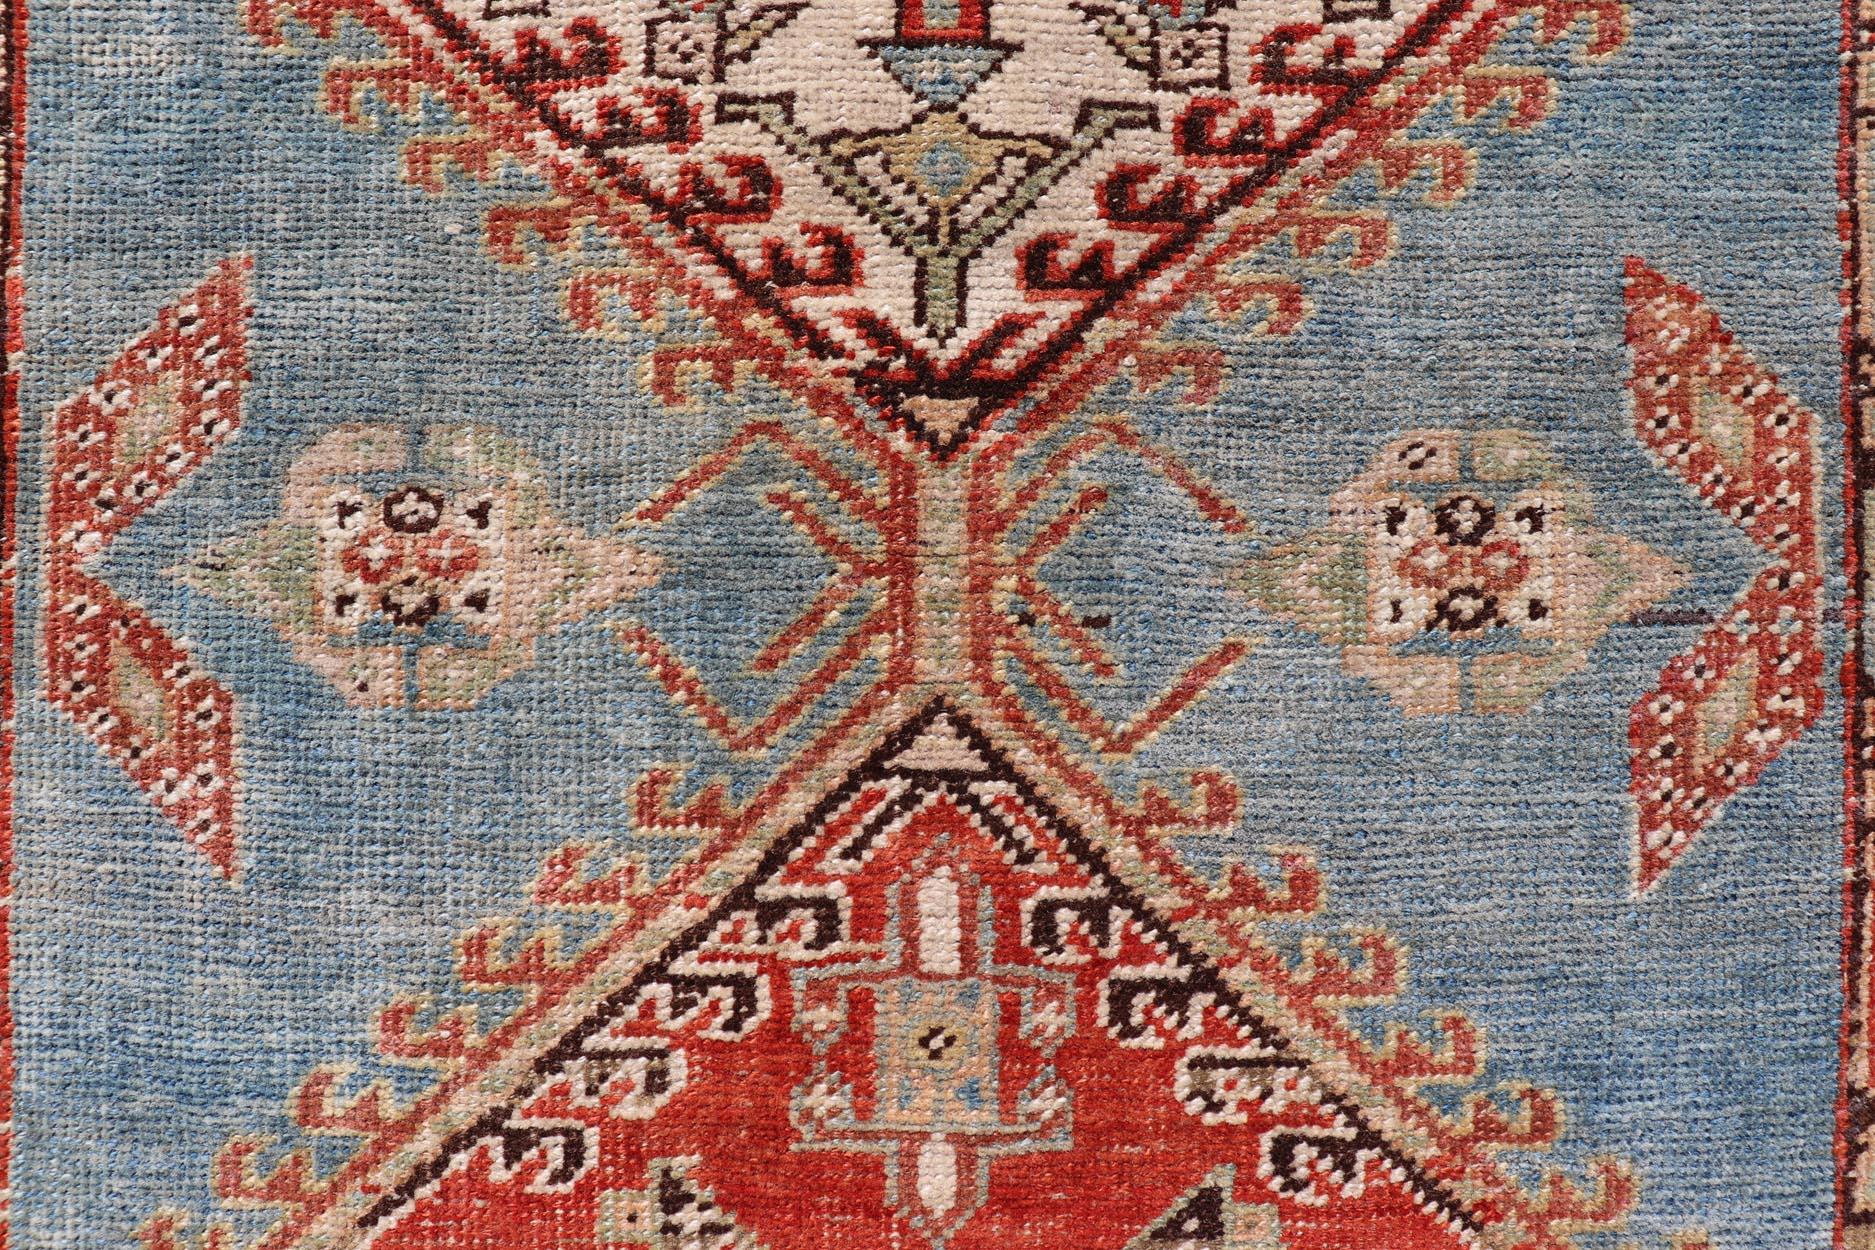 Antique Hand-Knotted Sarab Runner with Sub-Geometric Design in Red, Blue & Ivory In Good Condition For Sale In Atlanta, GA